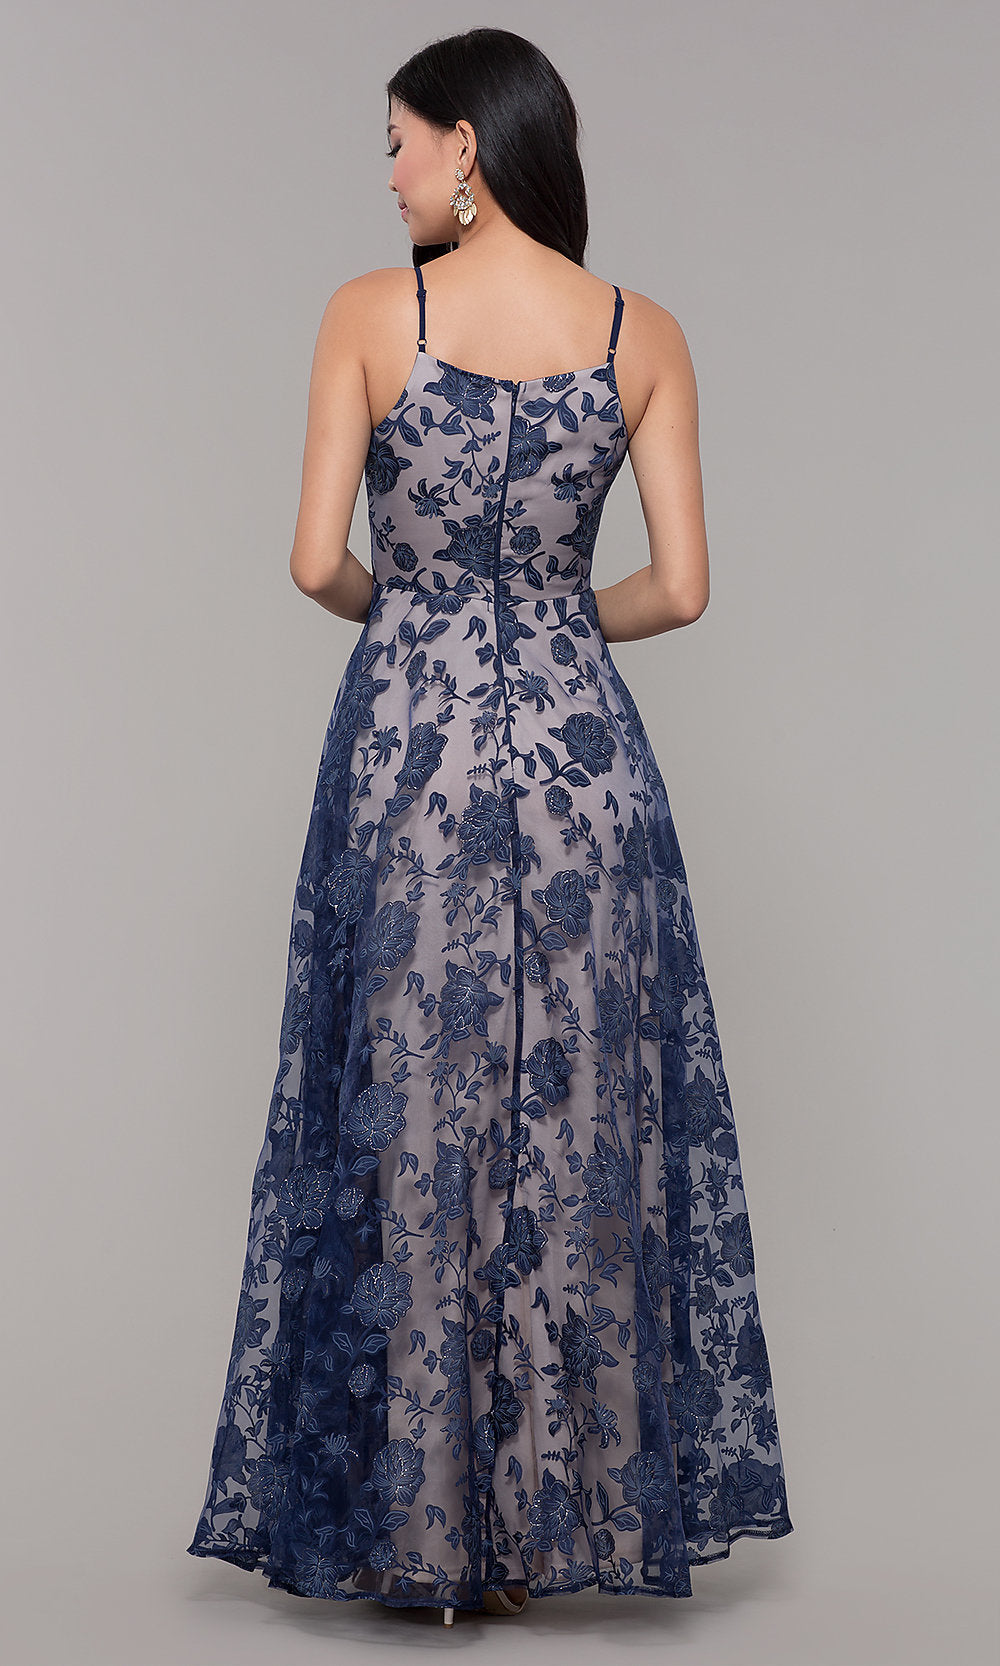 Navy/Nude Long Formal Prom Dress with Glitter Floral Print